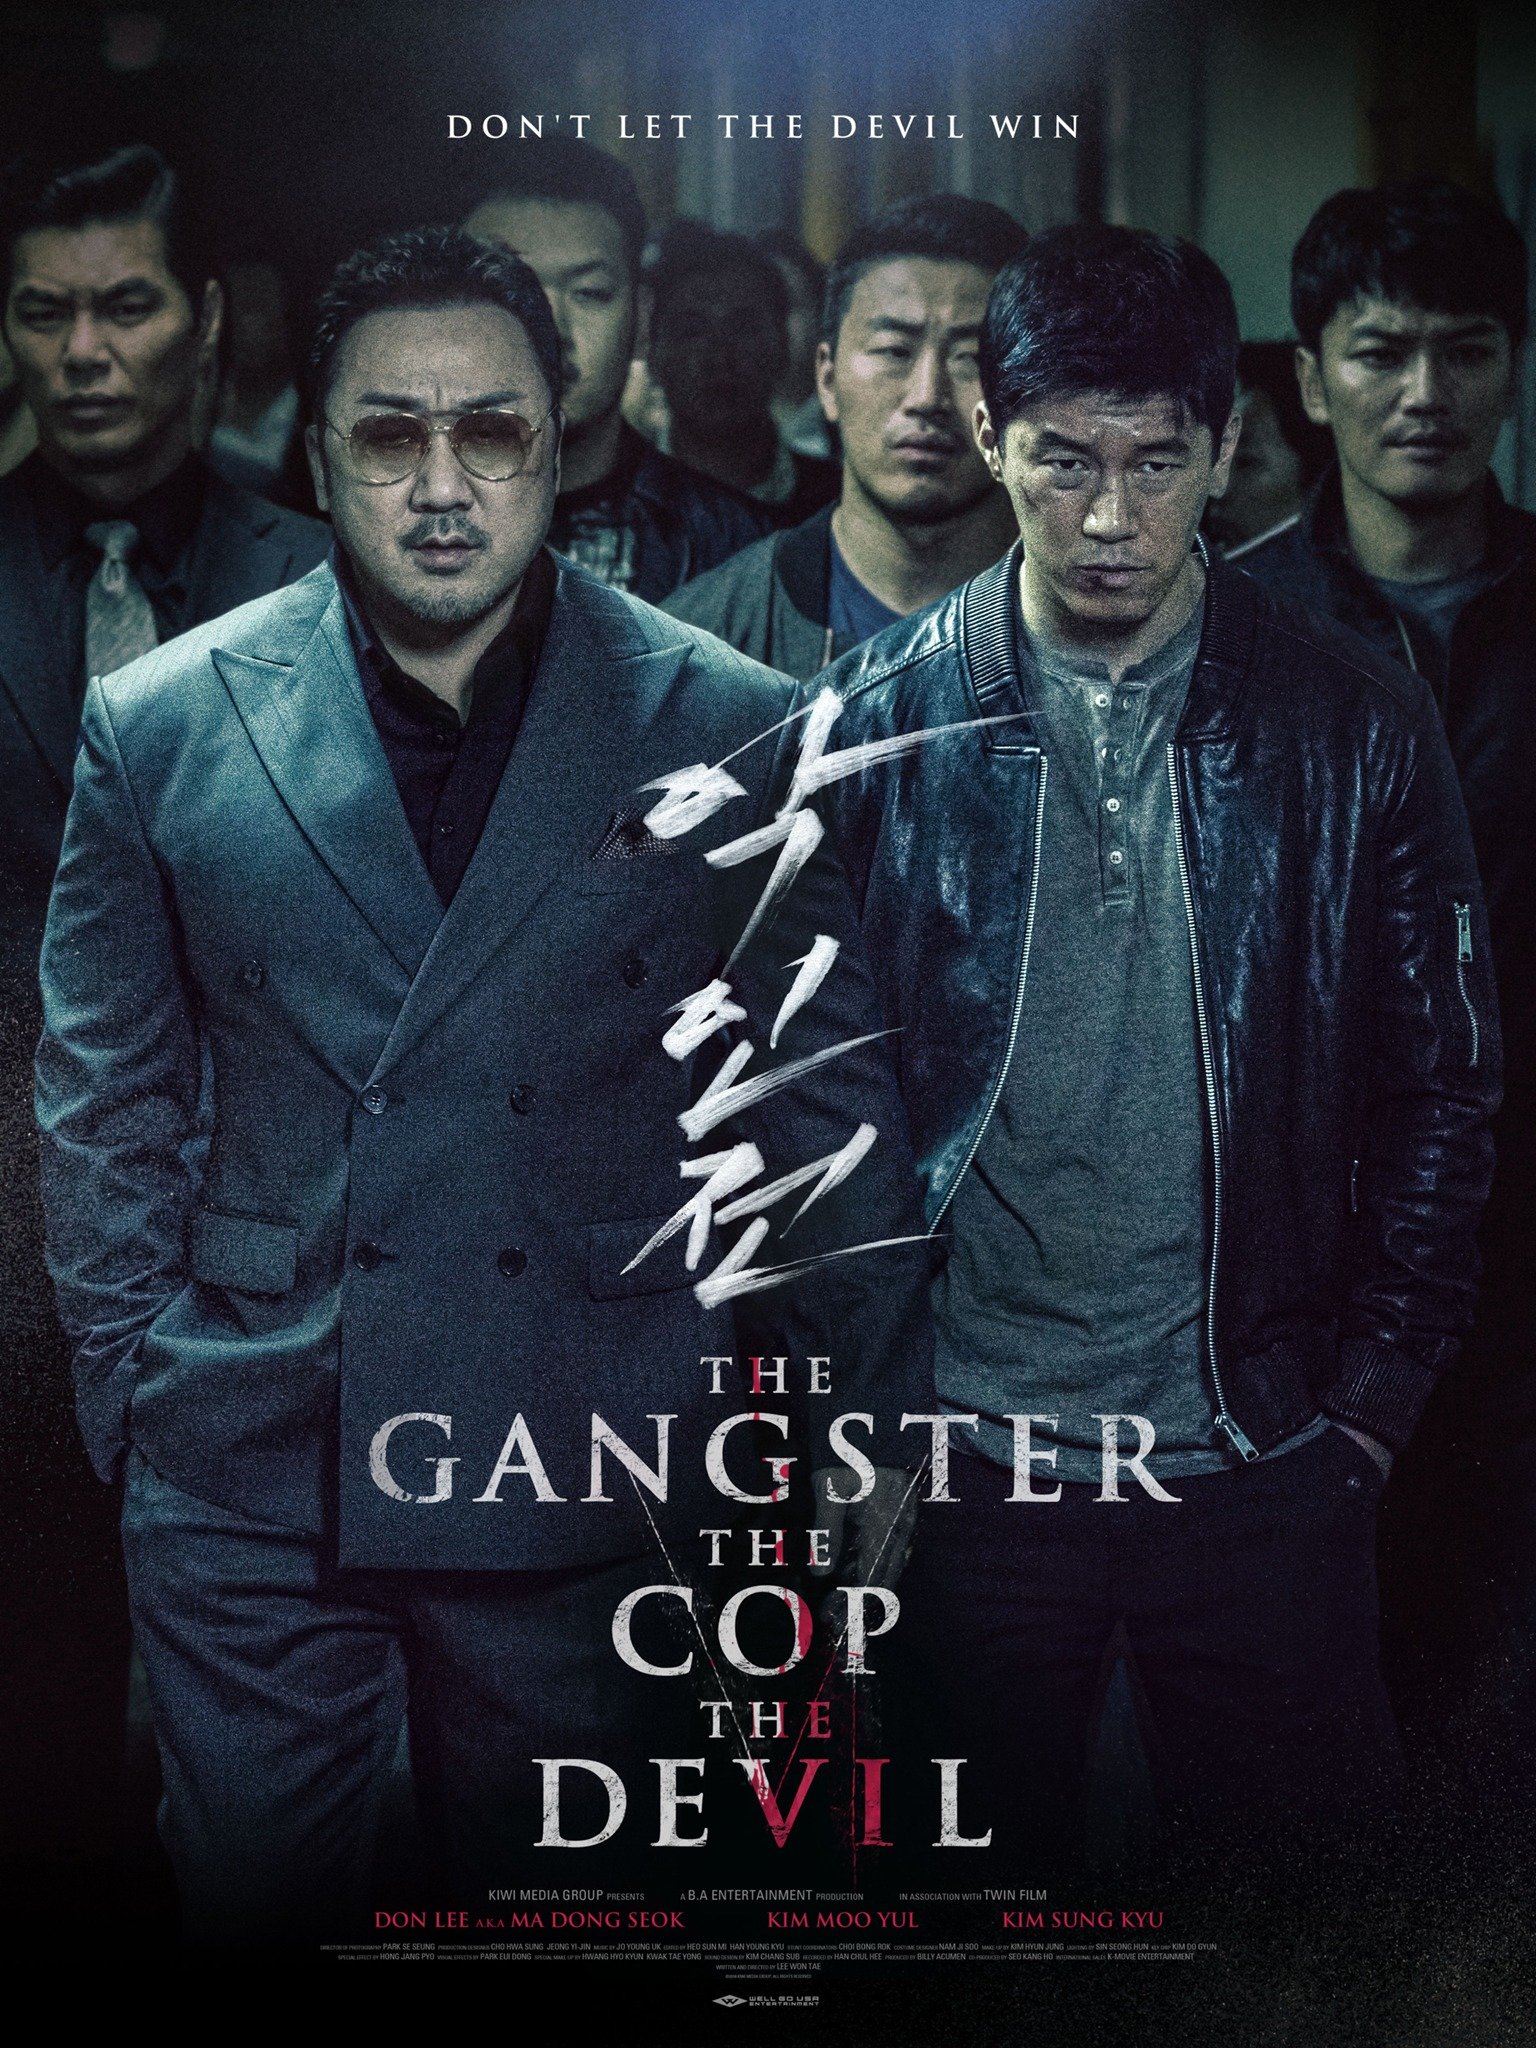 The Gangster the Cop the Devil - Rotten Tomatoes